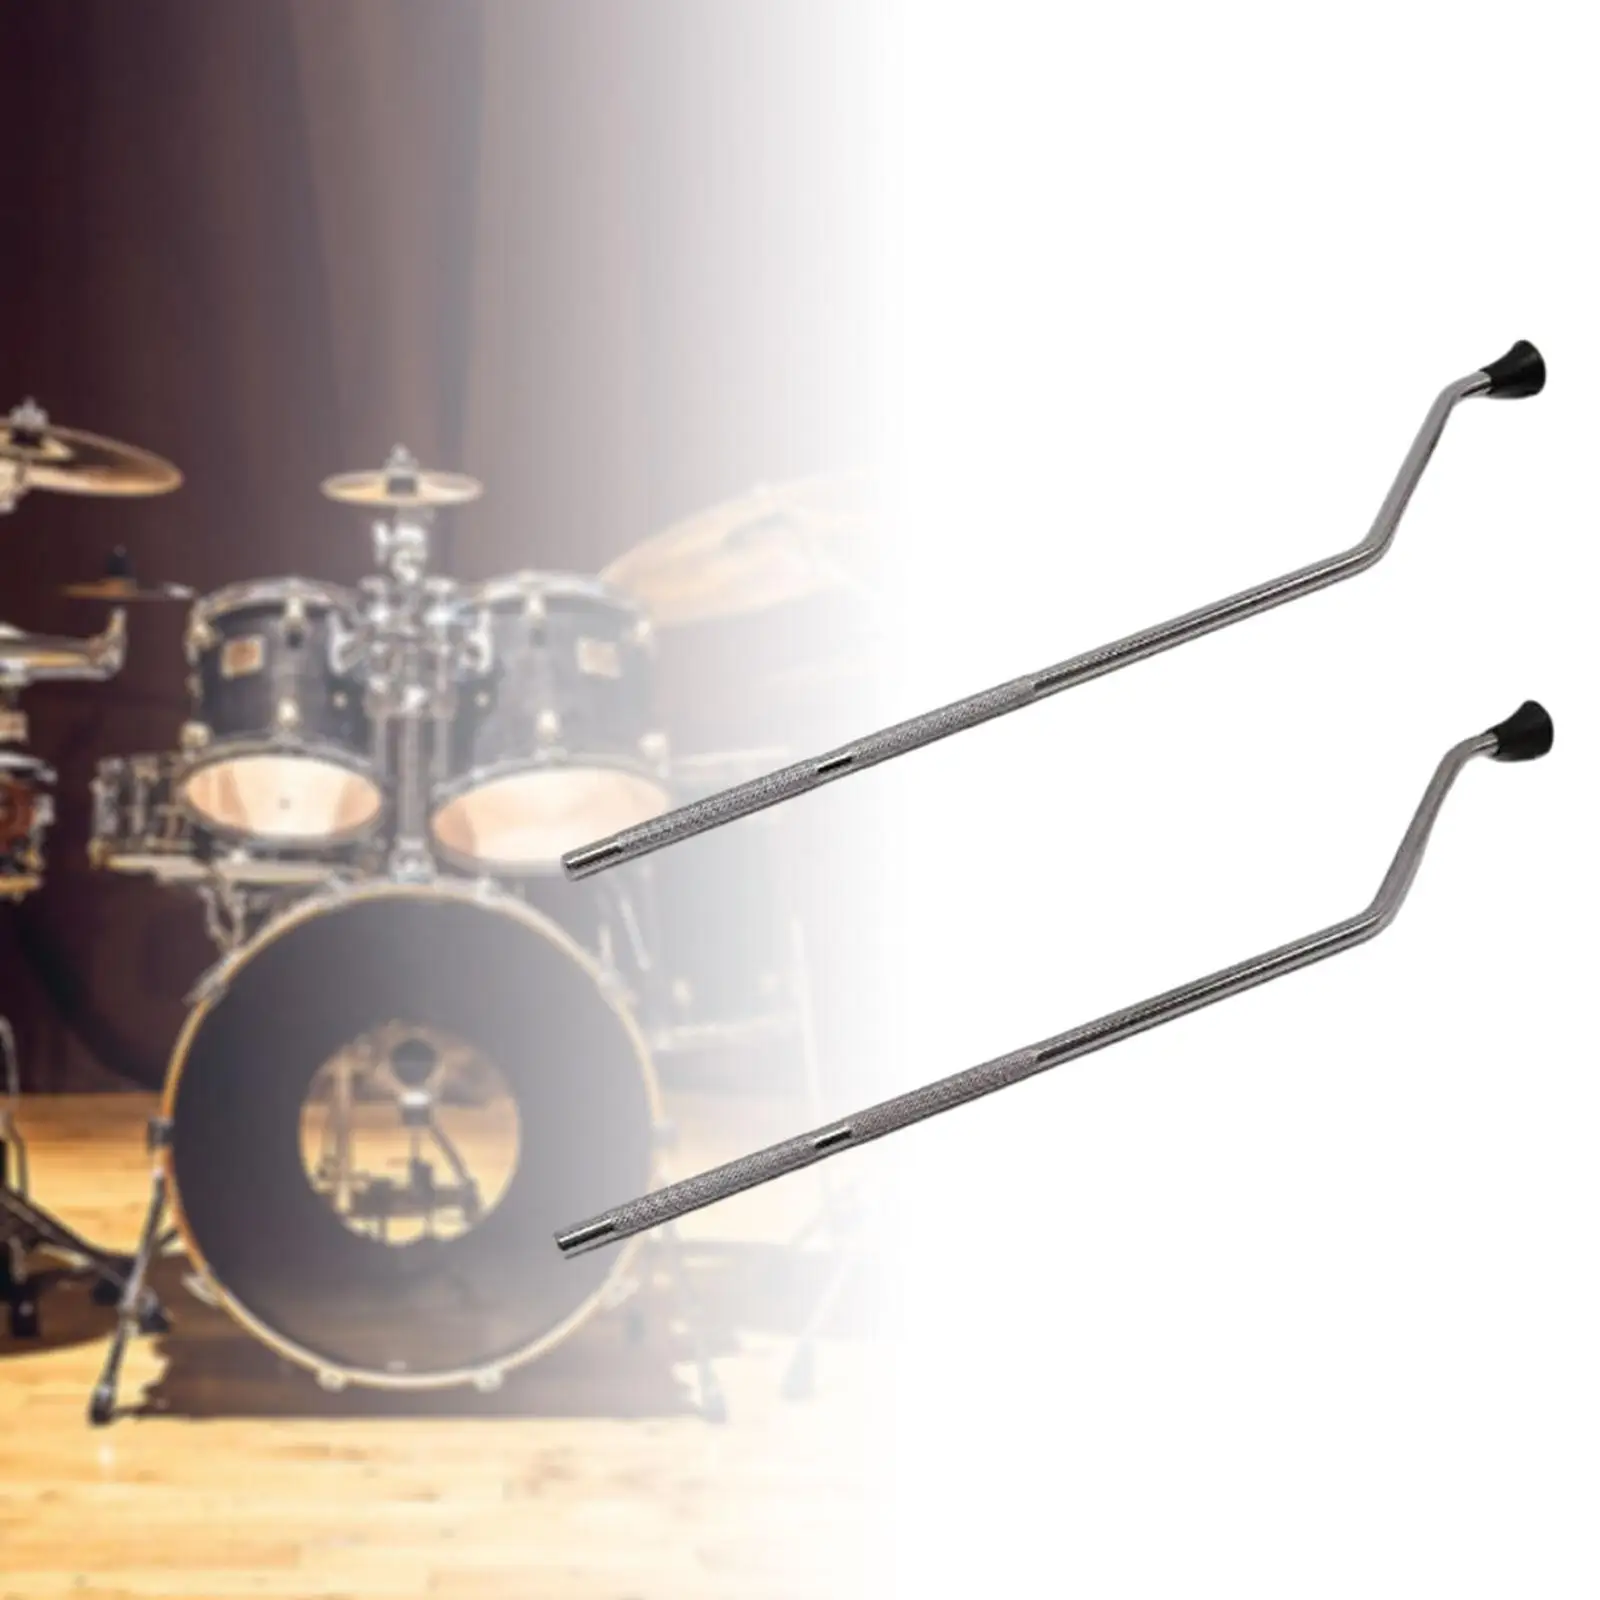 2x Bass Drum Legs Non Slip Durable Sturdy (48cm Length) Brackets Easy to Install Metal Support Rack Percussion Parts Drum Parts